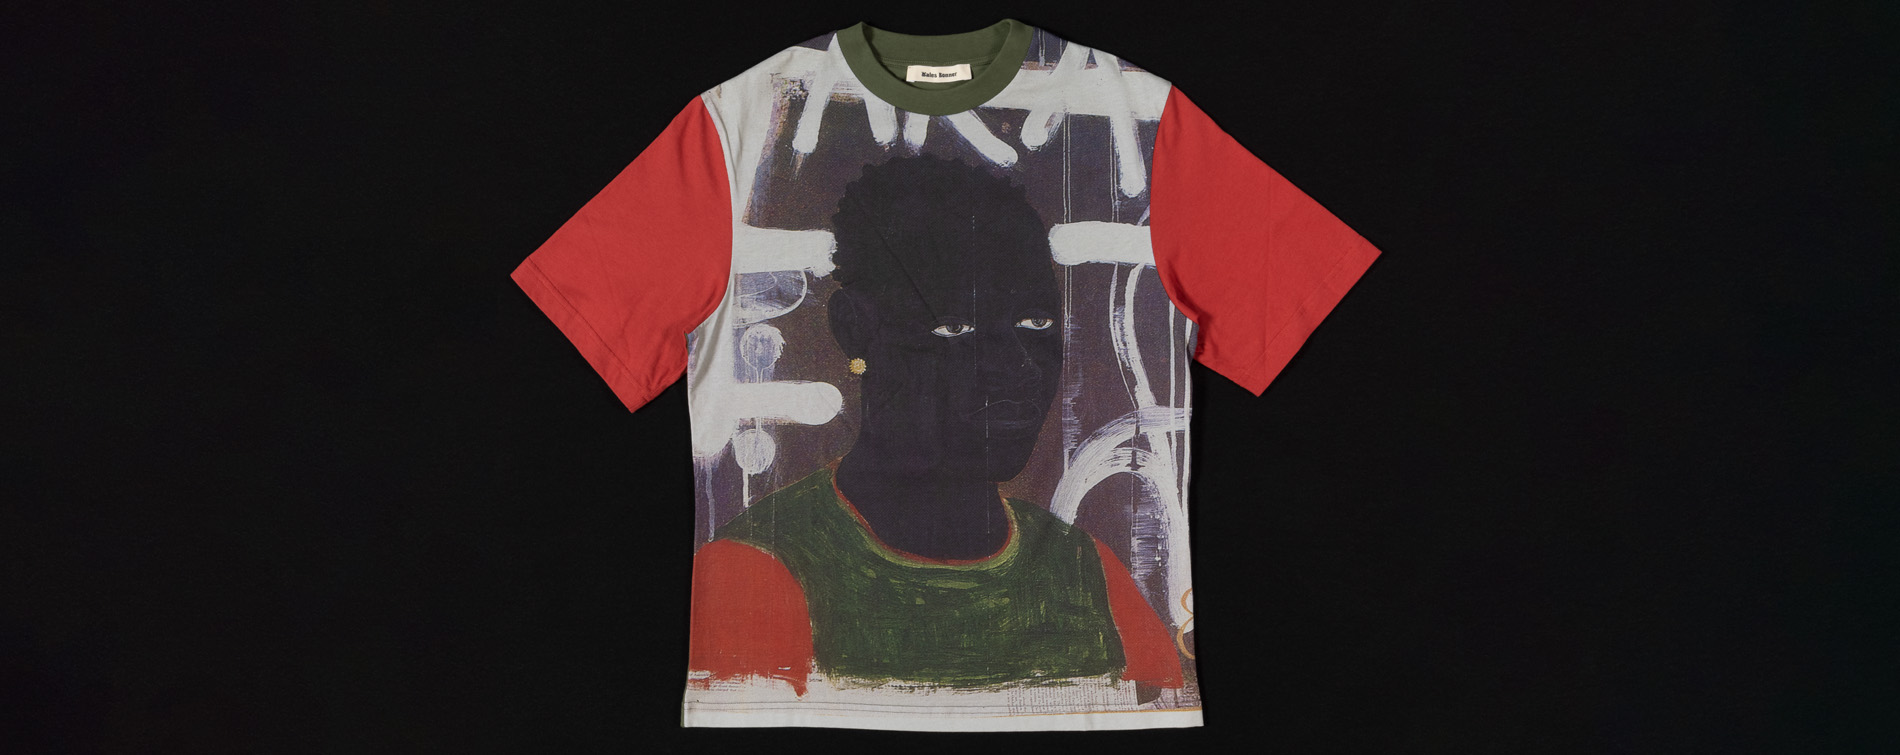 t shirt with red sleeves and a print of an illustration of a black man wearing a similar shirt